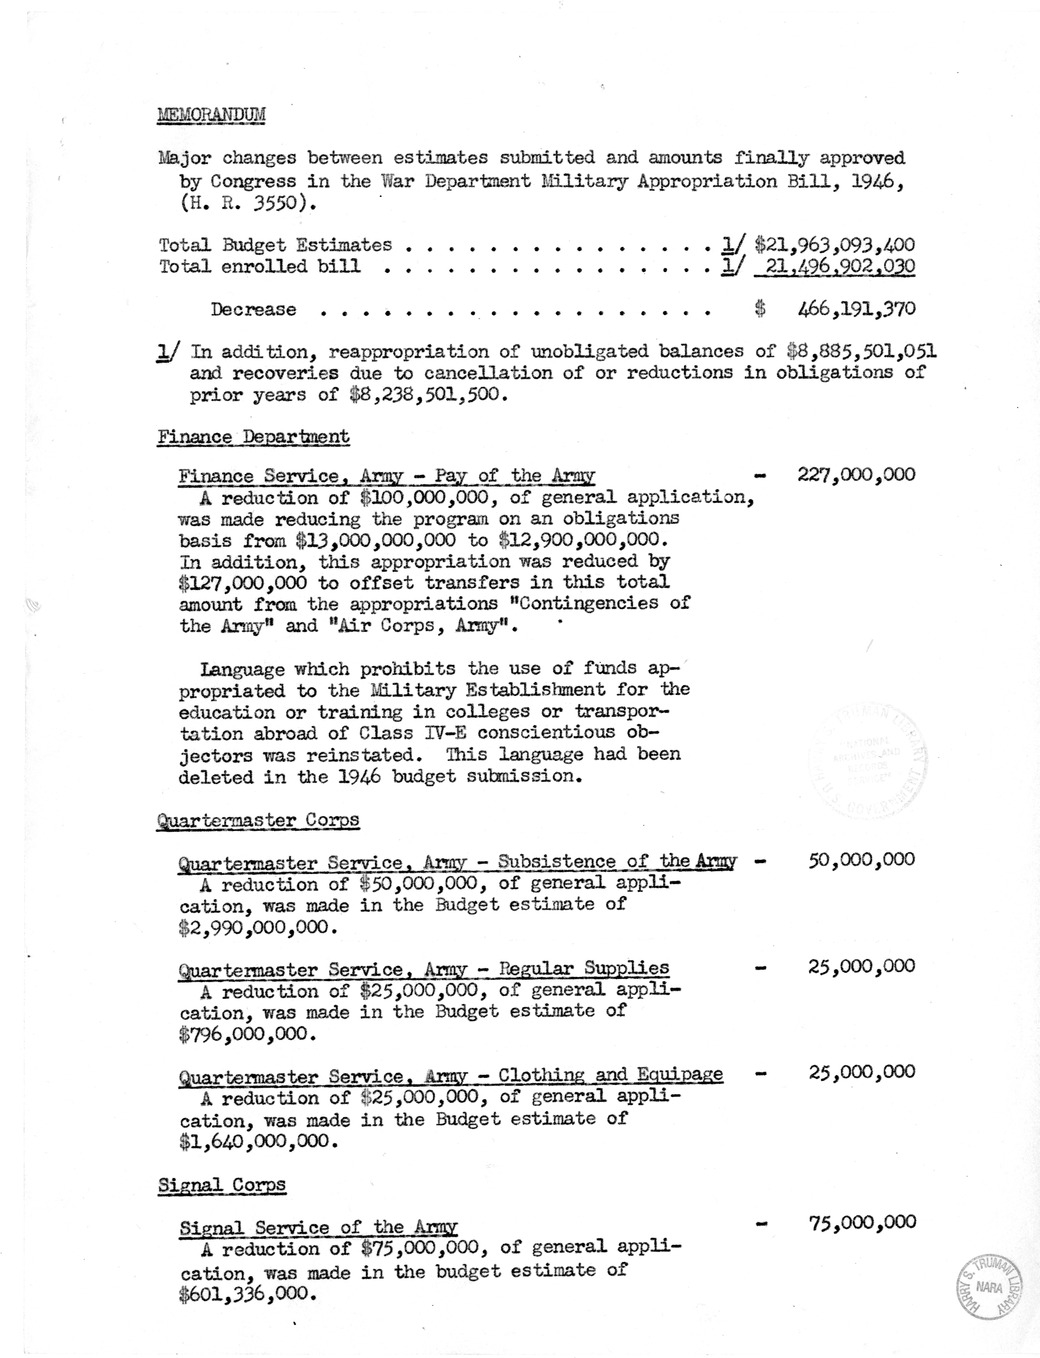 Memorandum from Harold D. Smith to M. C. Latta, H.R. 3550, Making Appropriations for the Military Establishment for the Fiscal Year Ending June 30, 1946, and for Other Purposes, with Attachments